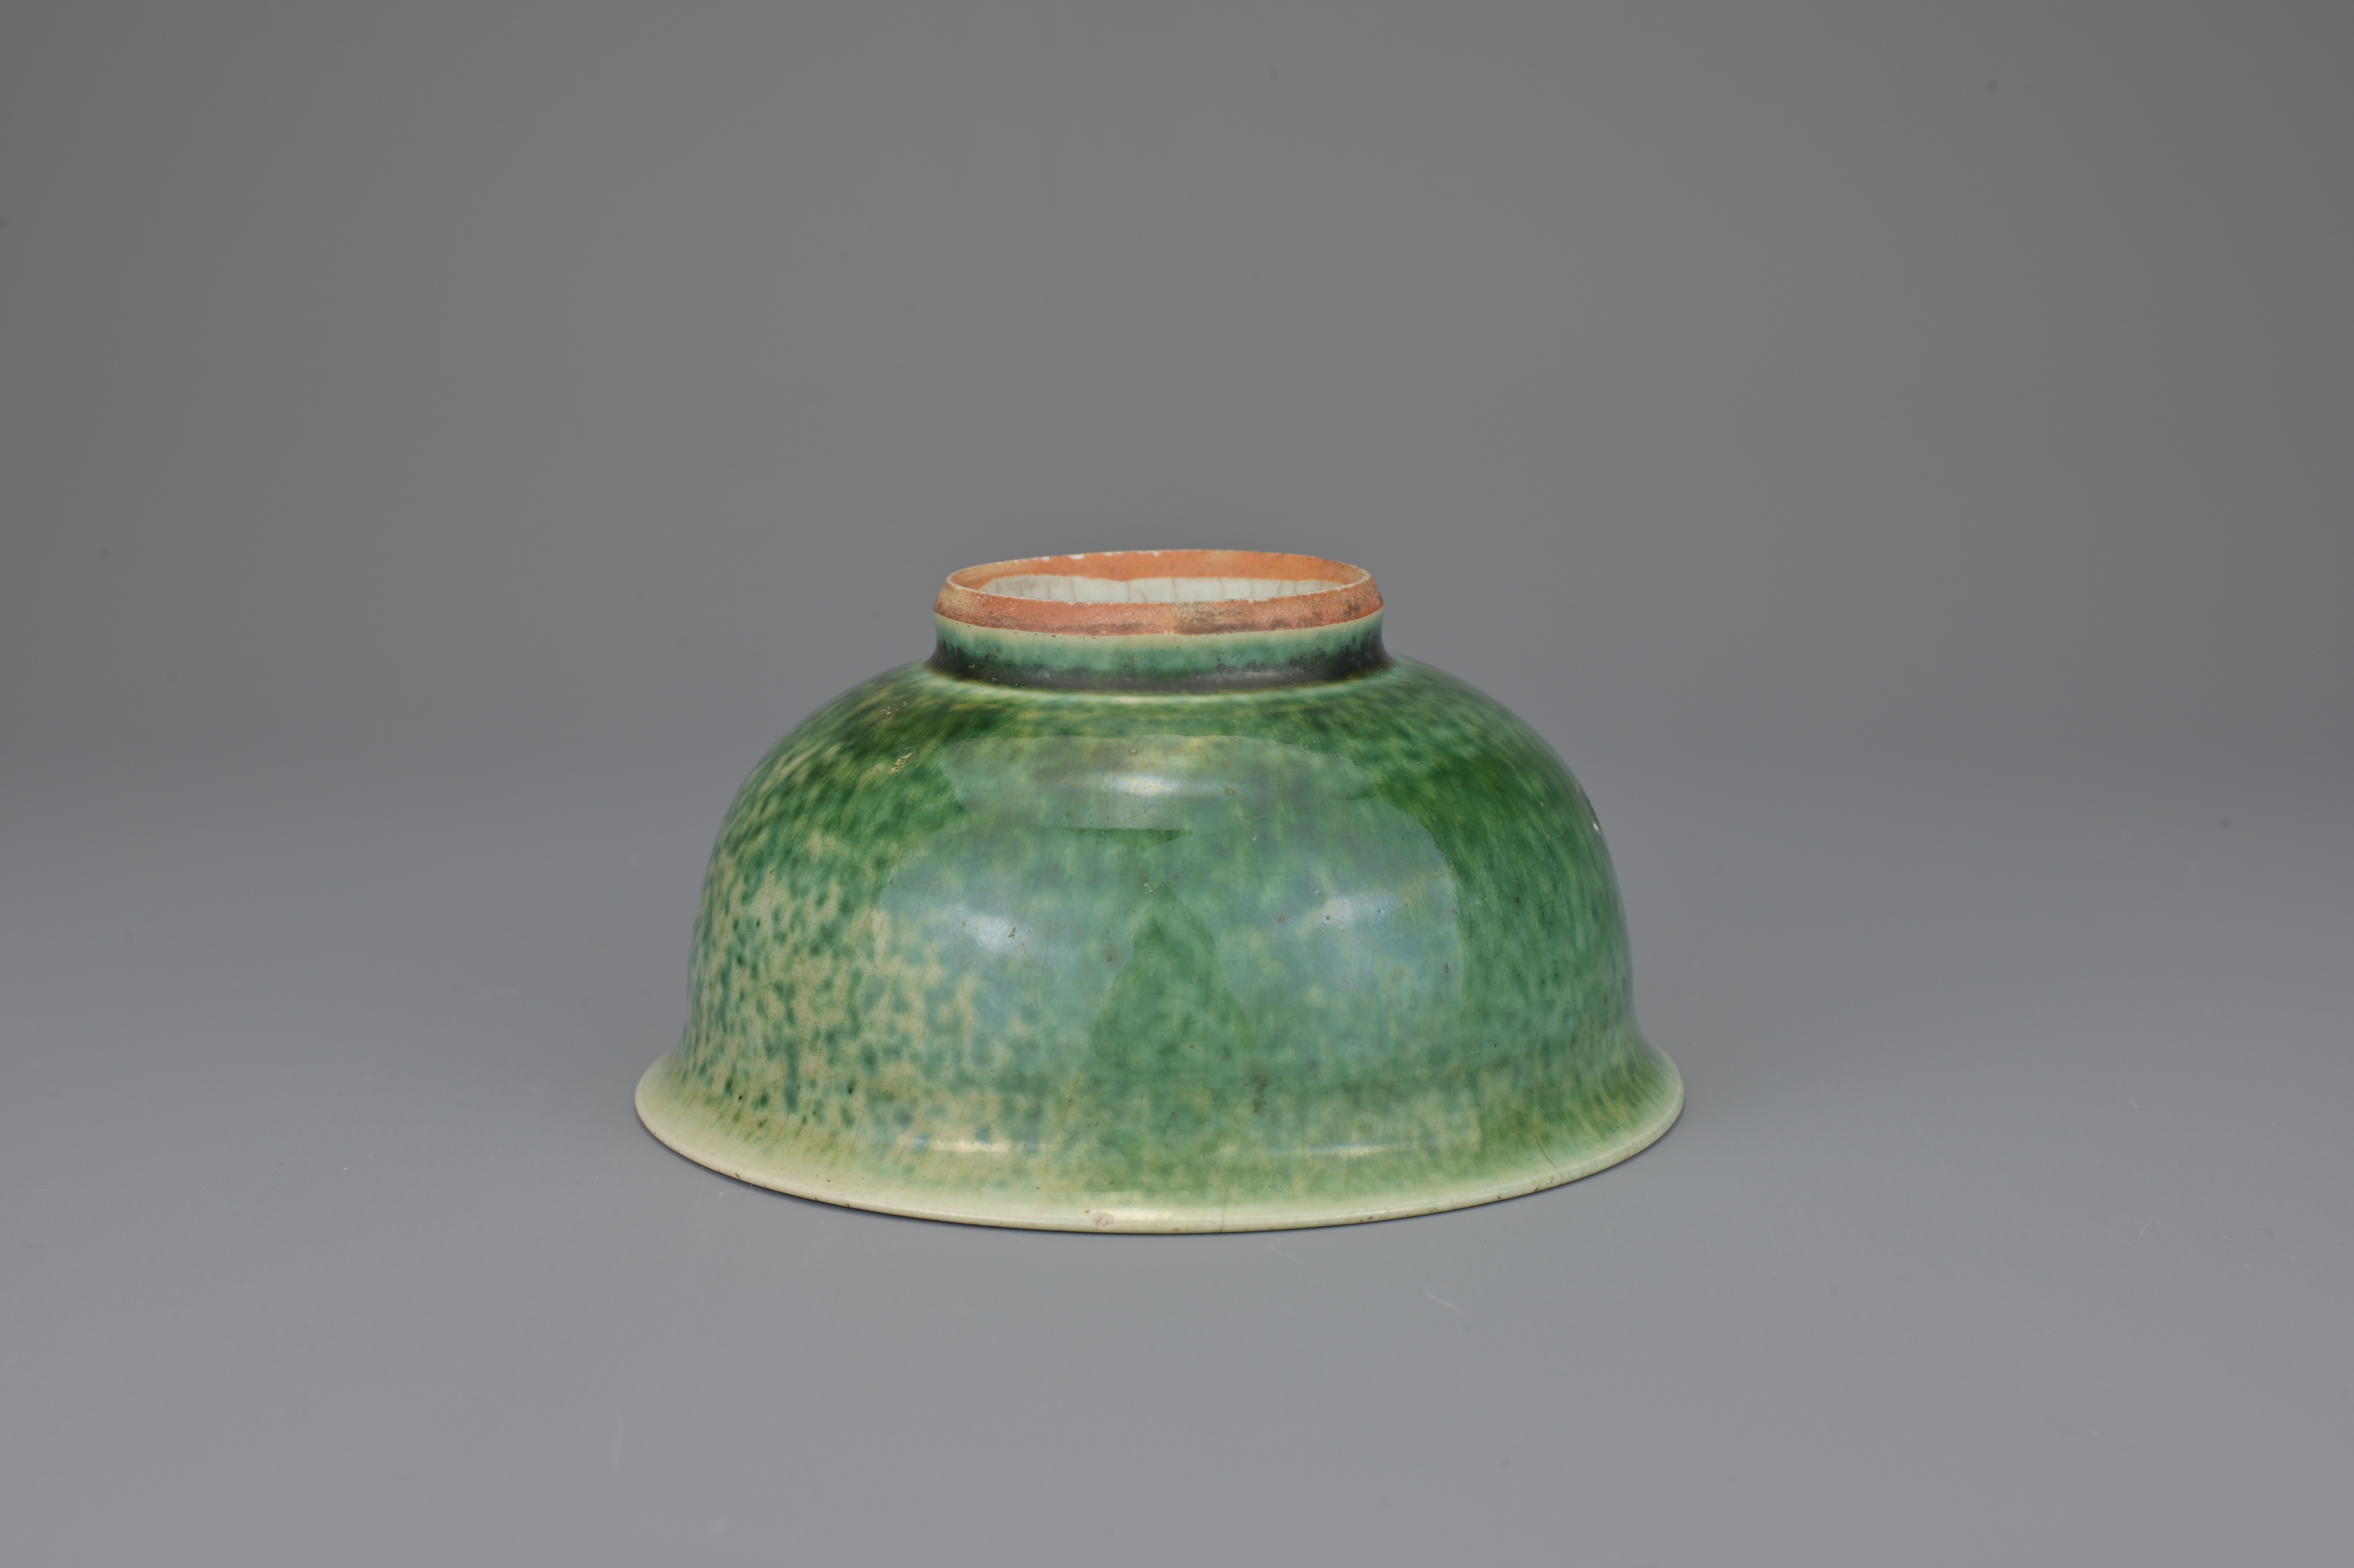 CHINESE COPPER-GREEN GLAZED PORCELAIN BOWL, QING DYNASTY, 18/19th CENTURY - Image 8 of 8